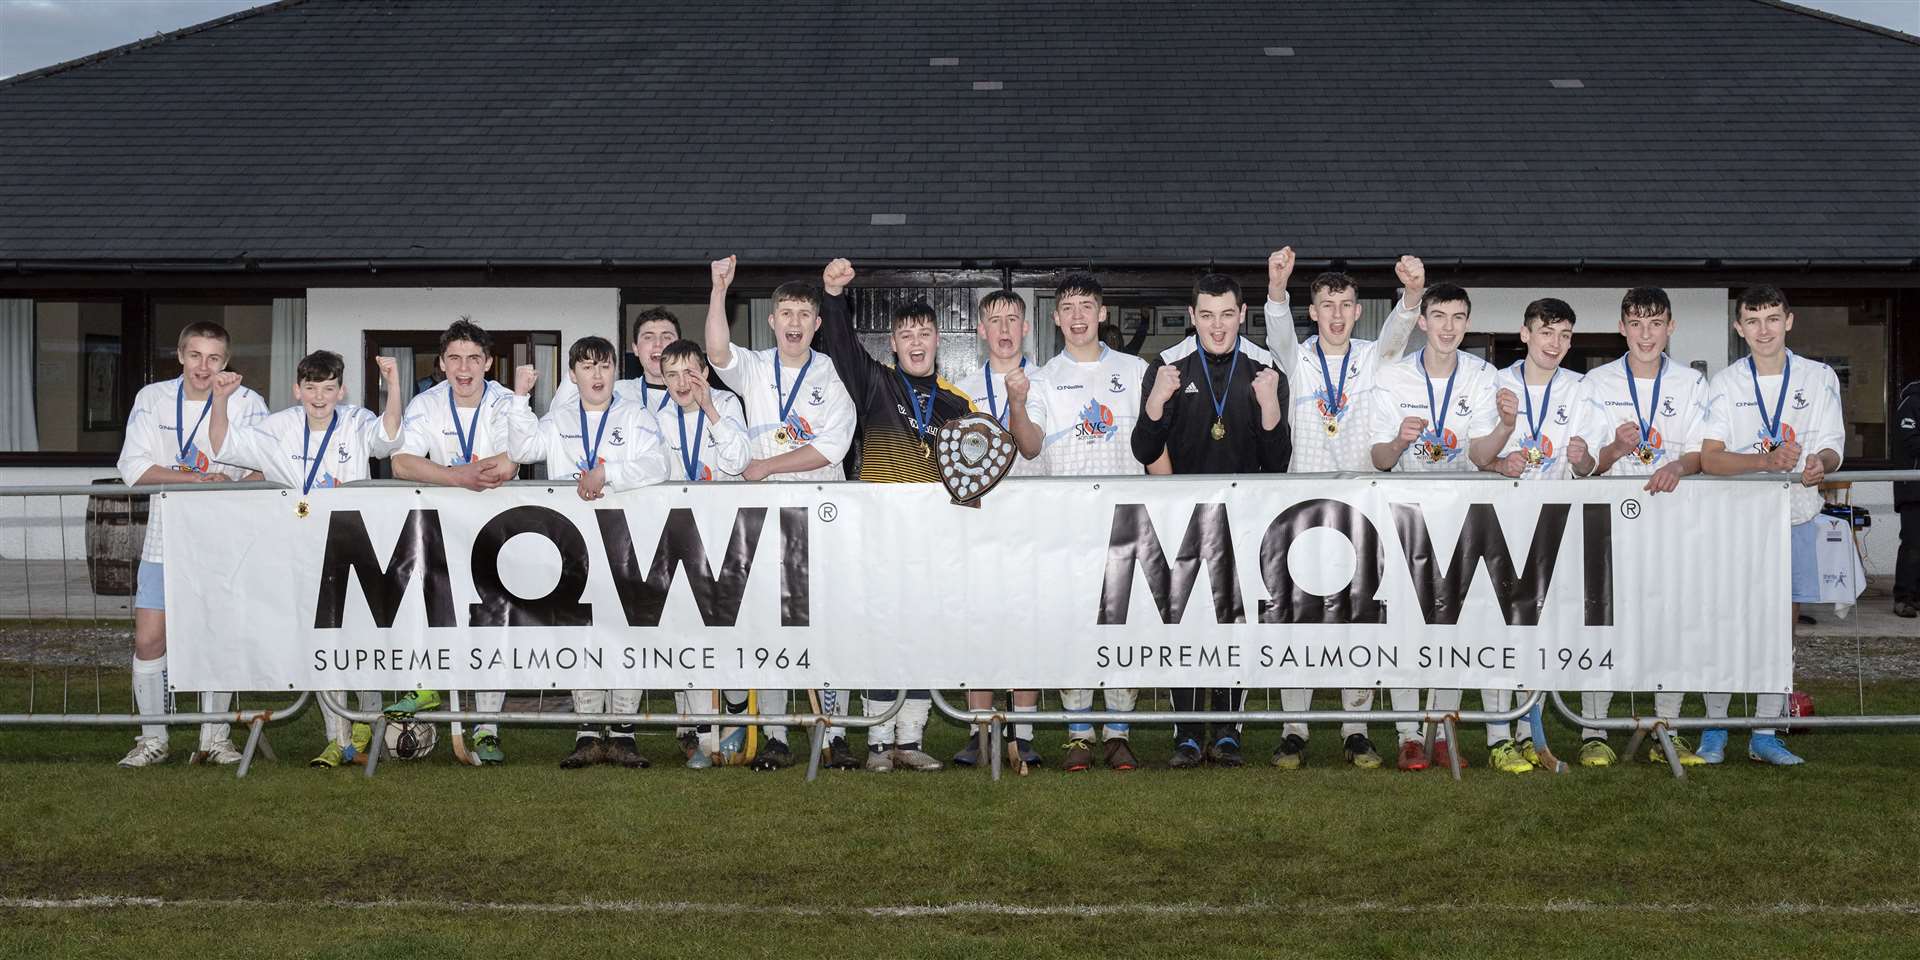 The Children and Youth Development Fund aims to promote shinty.